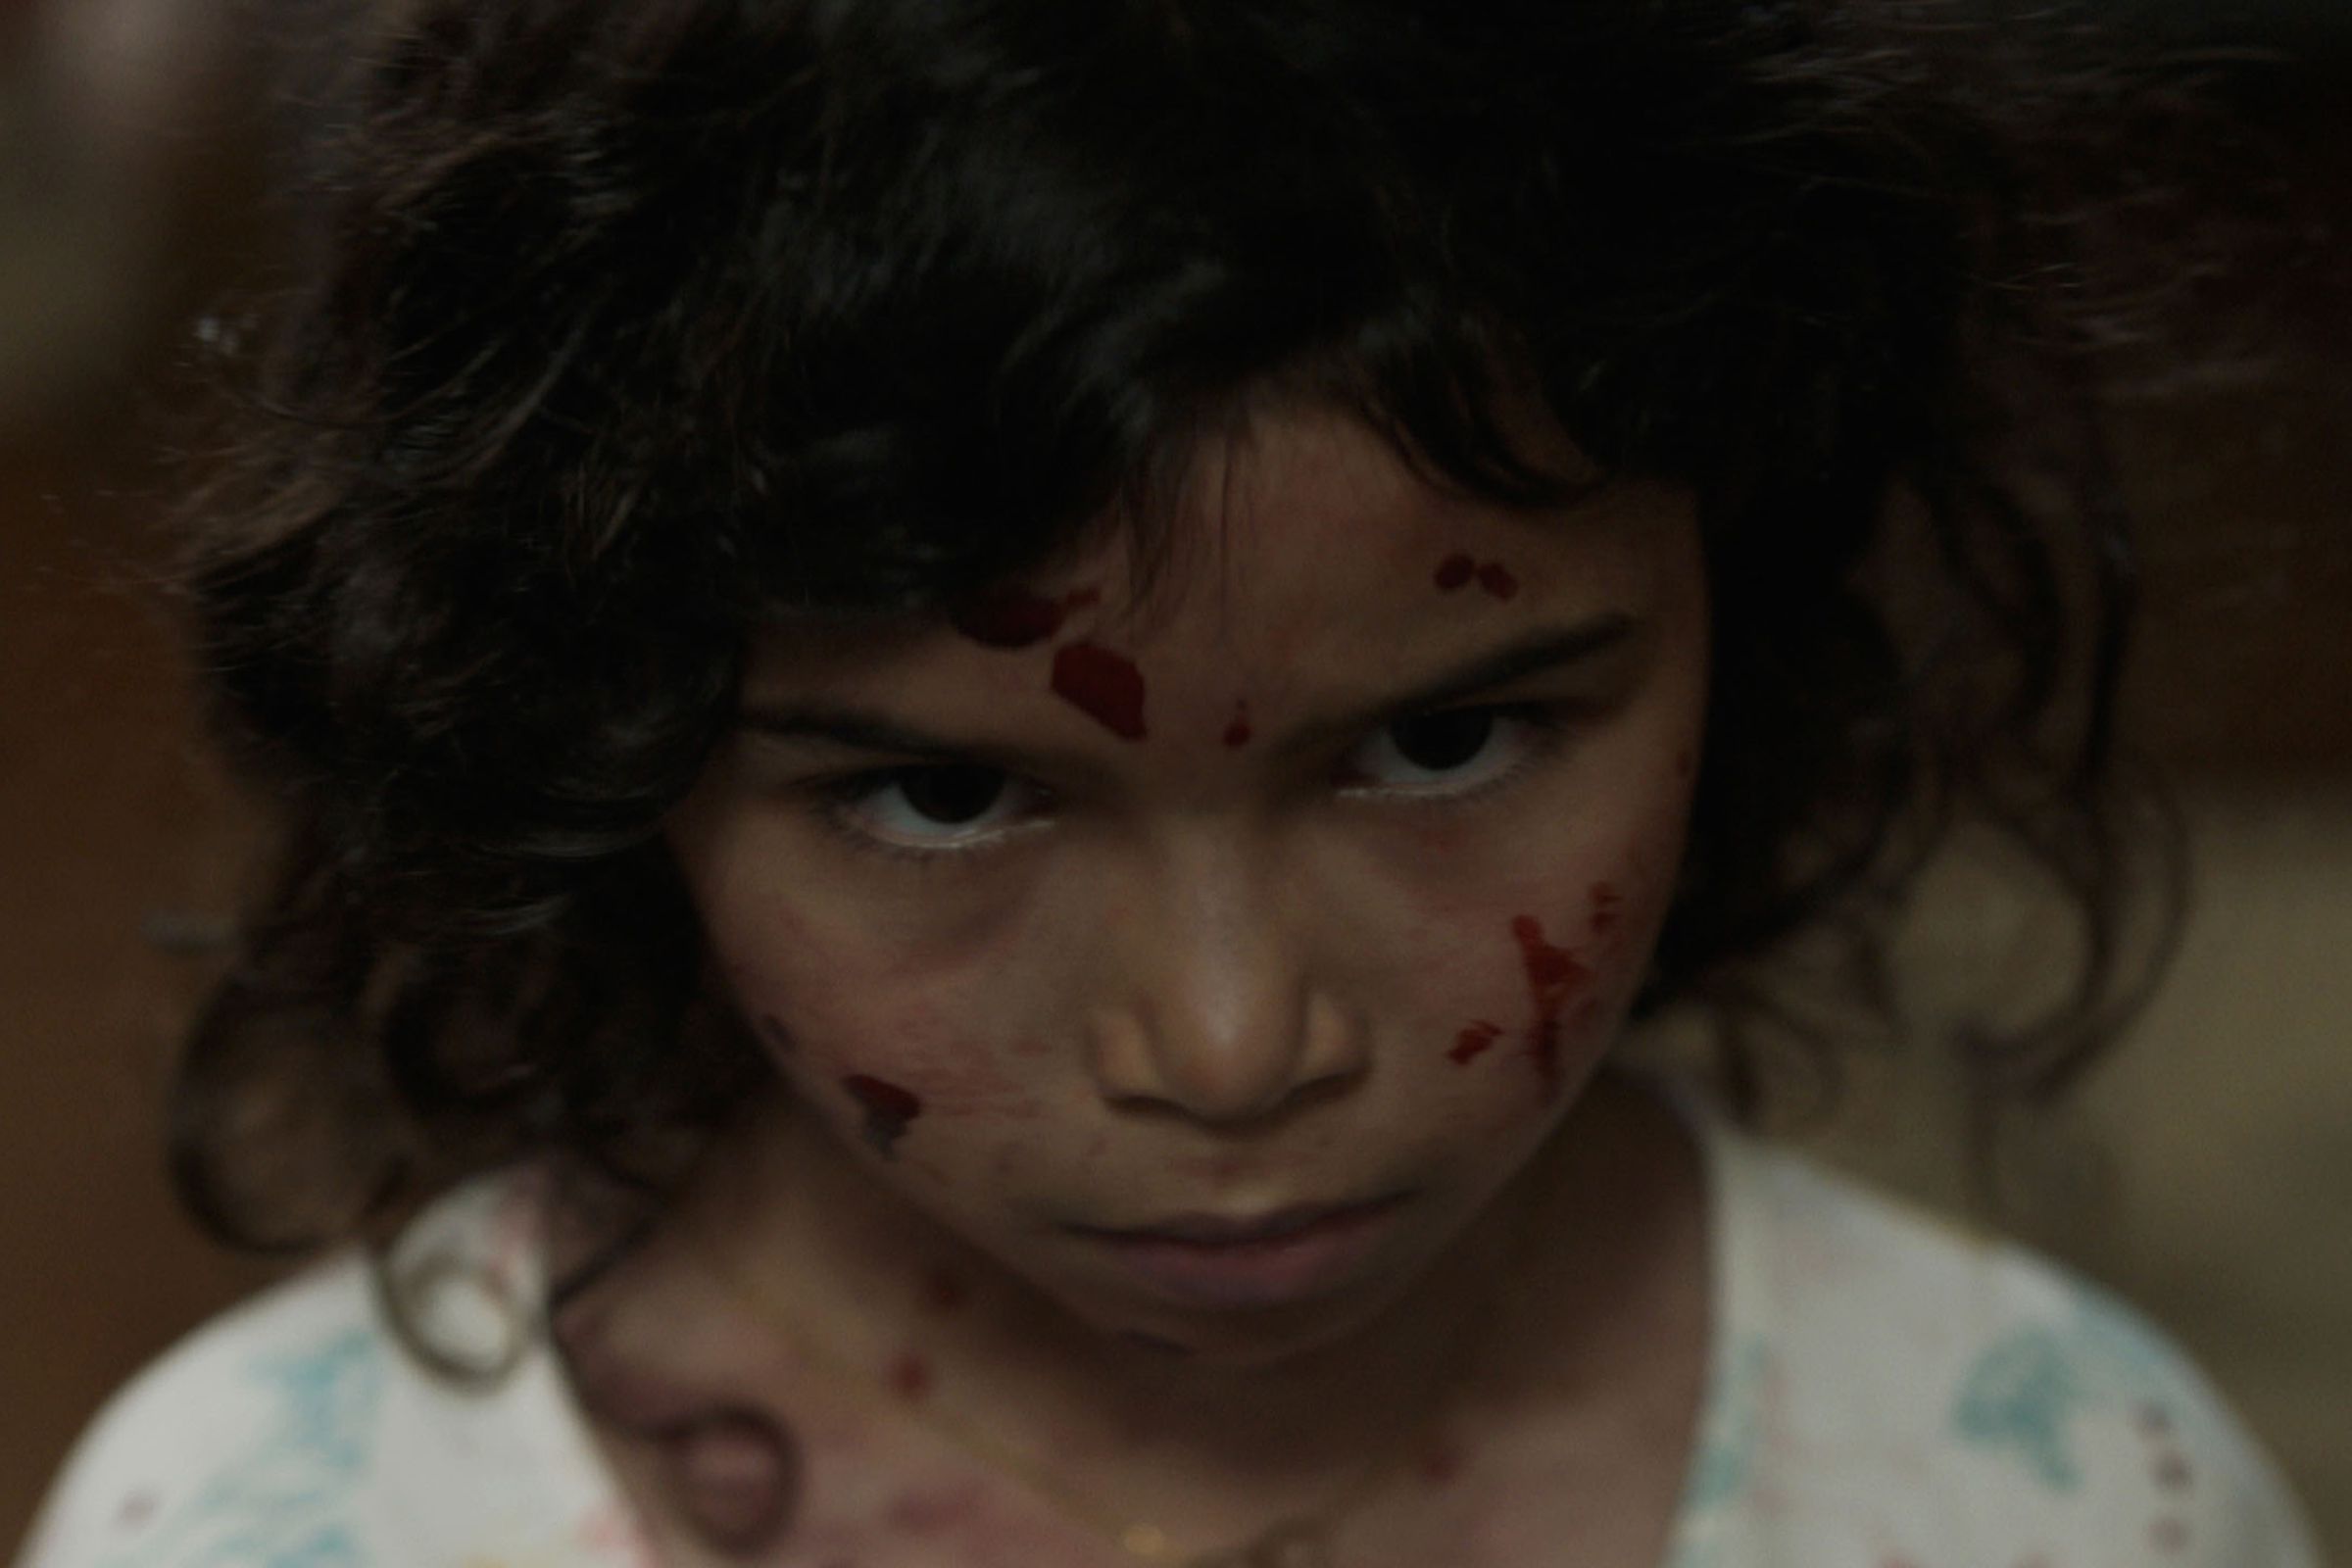 A little girl with a stern downturned faced that’s flecked with blood.